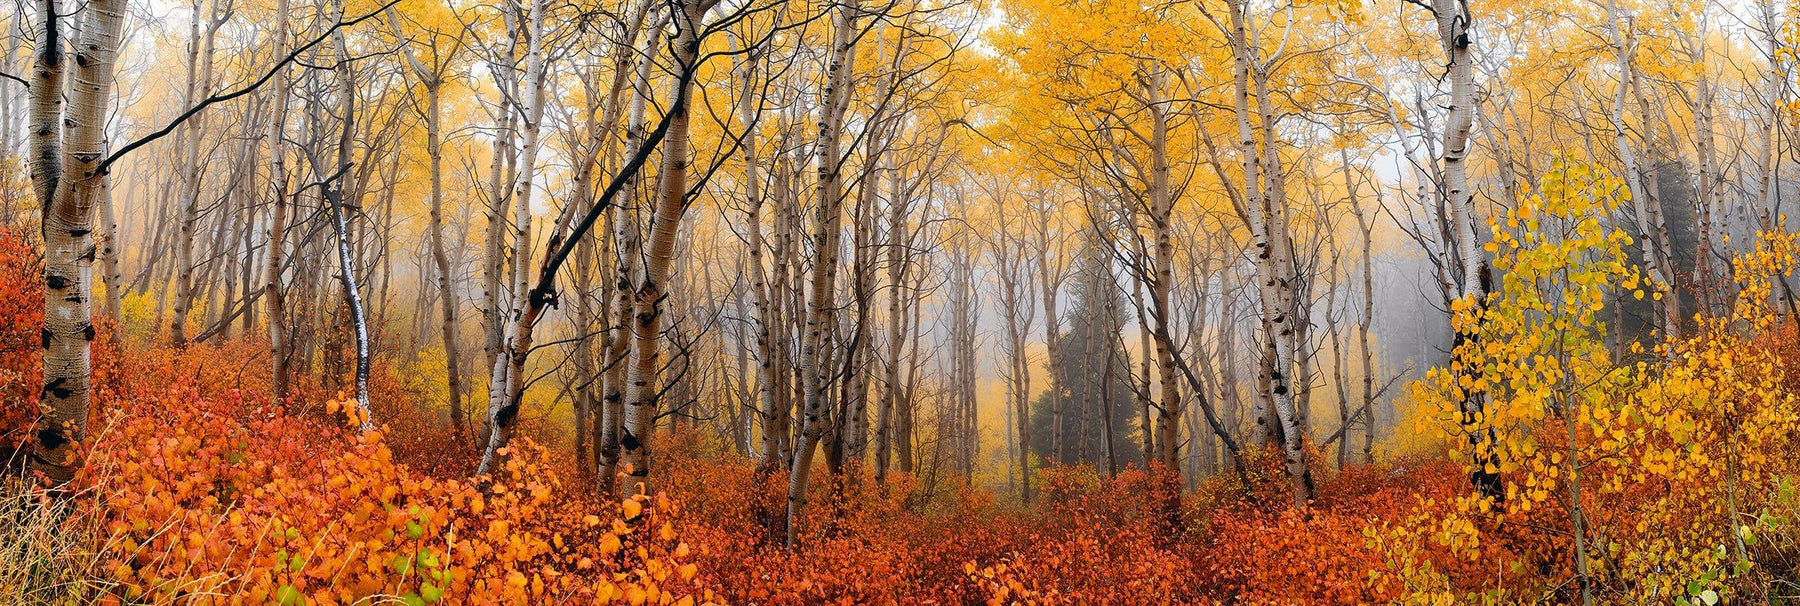 Misty autumn colored aspen forest filled with orange bushes and a pine tree in the background